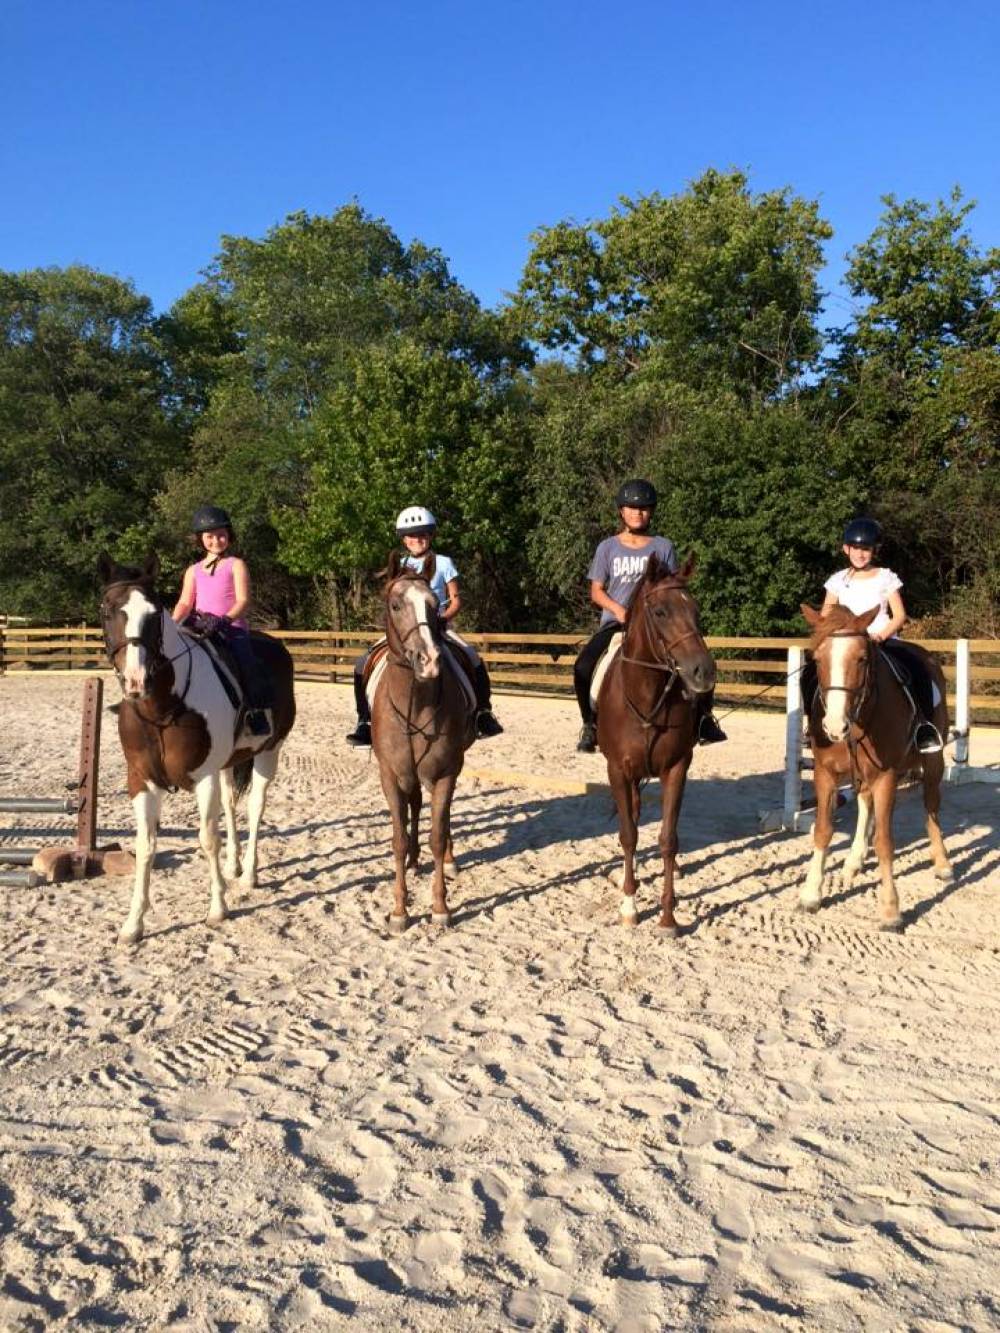 TOP ILLINOIS SPORTS CAMP: Windridge Farm Summer Horse Camp is a Top Sports Summer Camp located in Bolingbrook Illinois offering many fun and enriching Sports and other camp programs. 